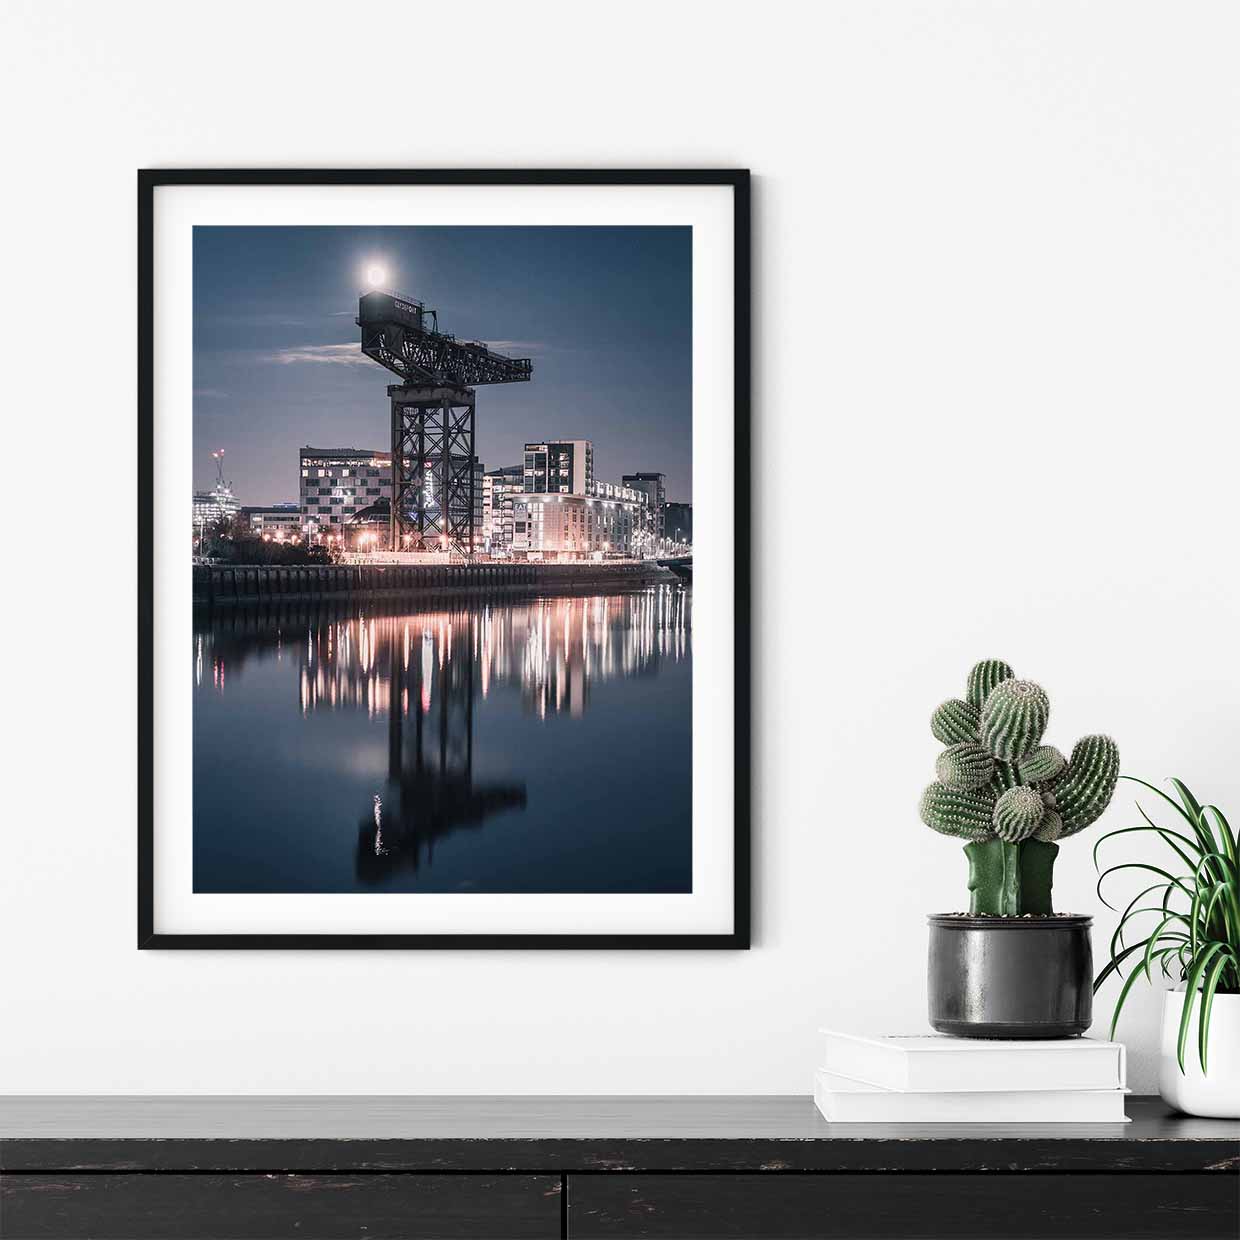 Finnieston crane, Glasgow signed and mounted print